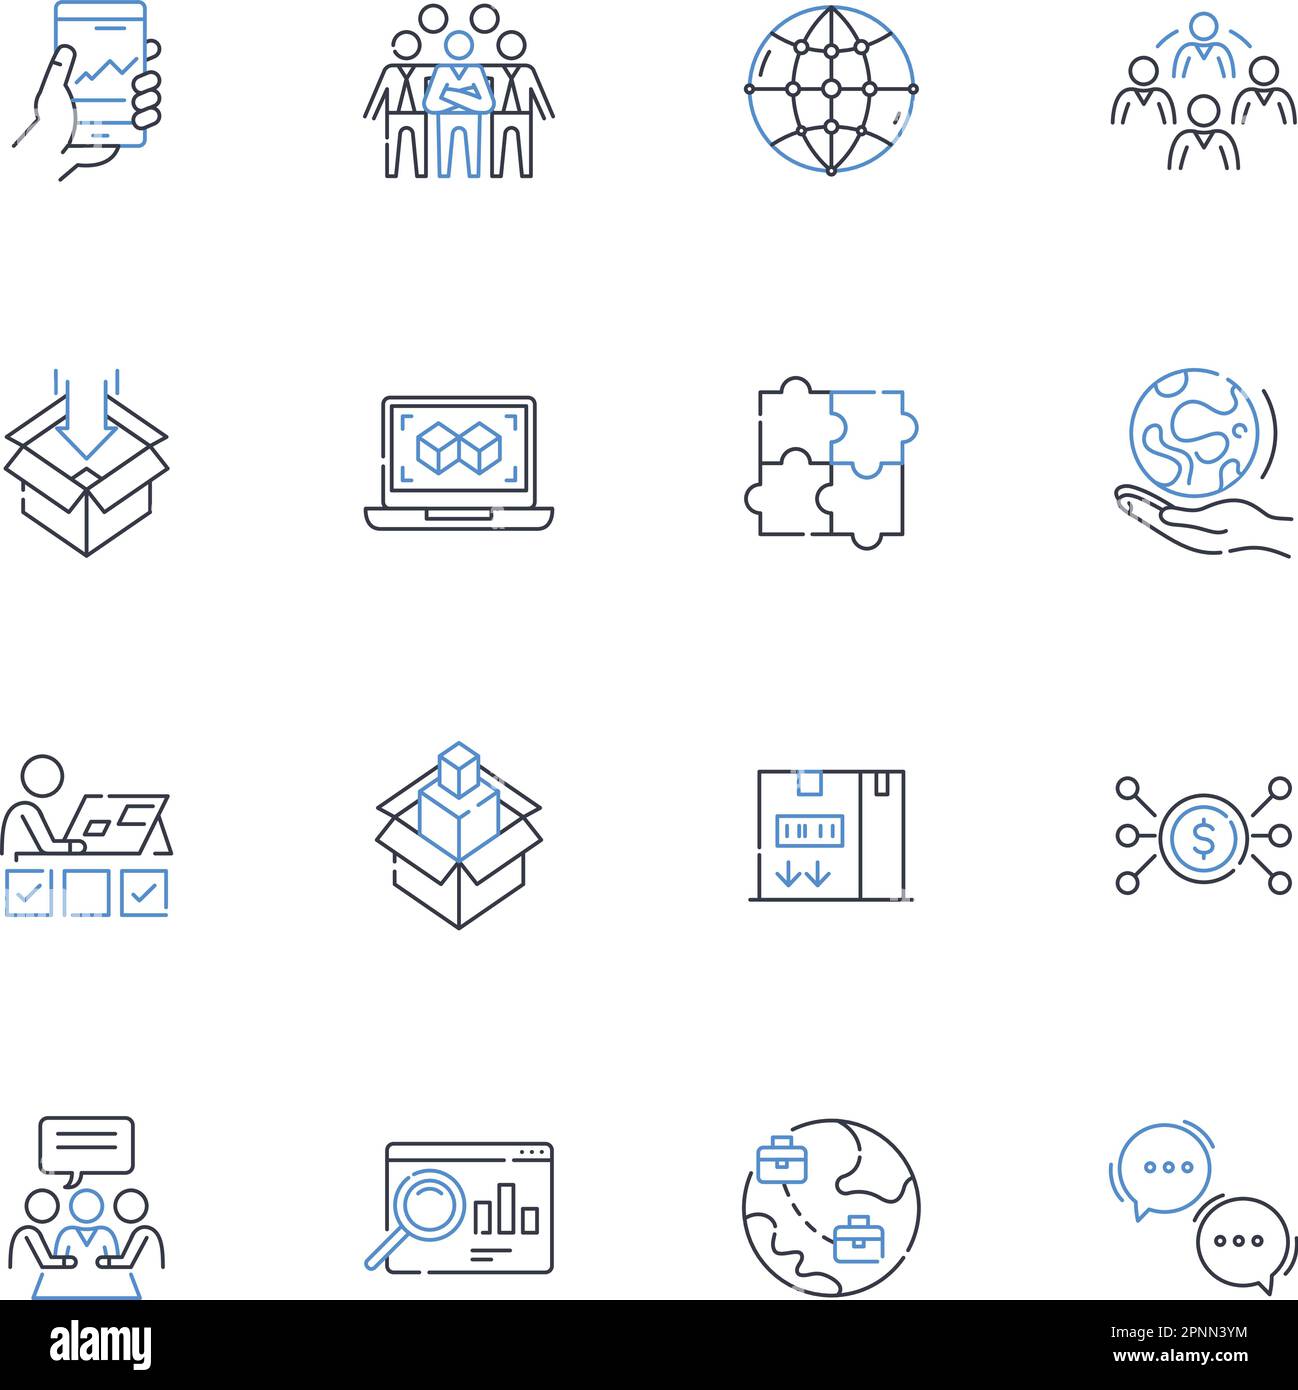 Divisionalization line icons collection. Segmentation, Specialization, Departmentalization, Diversification, Fragmentation, Differentiation Stock Vector